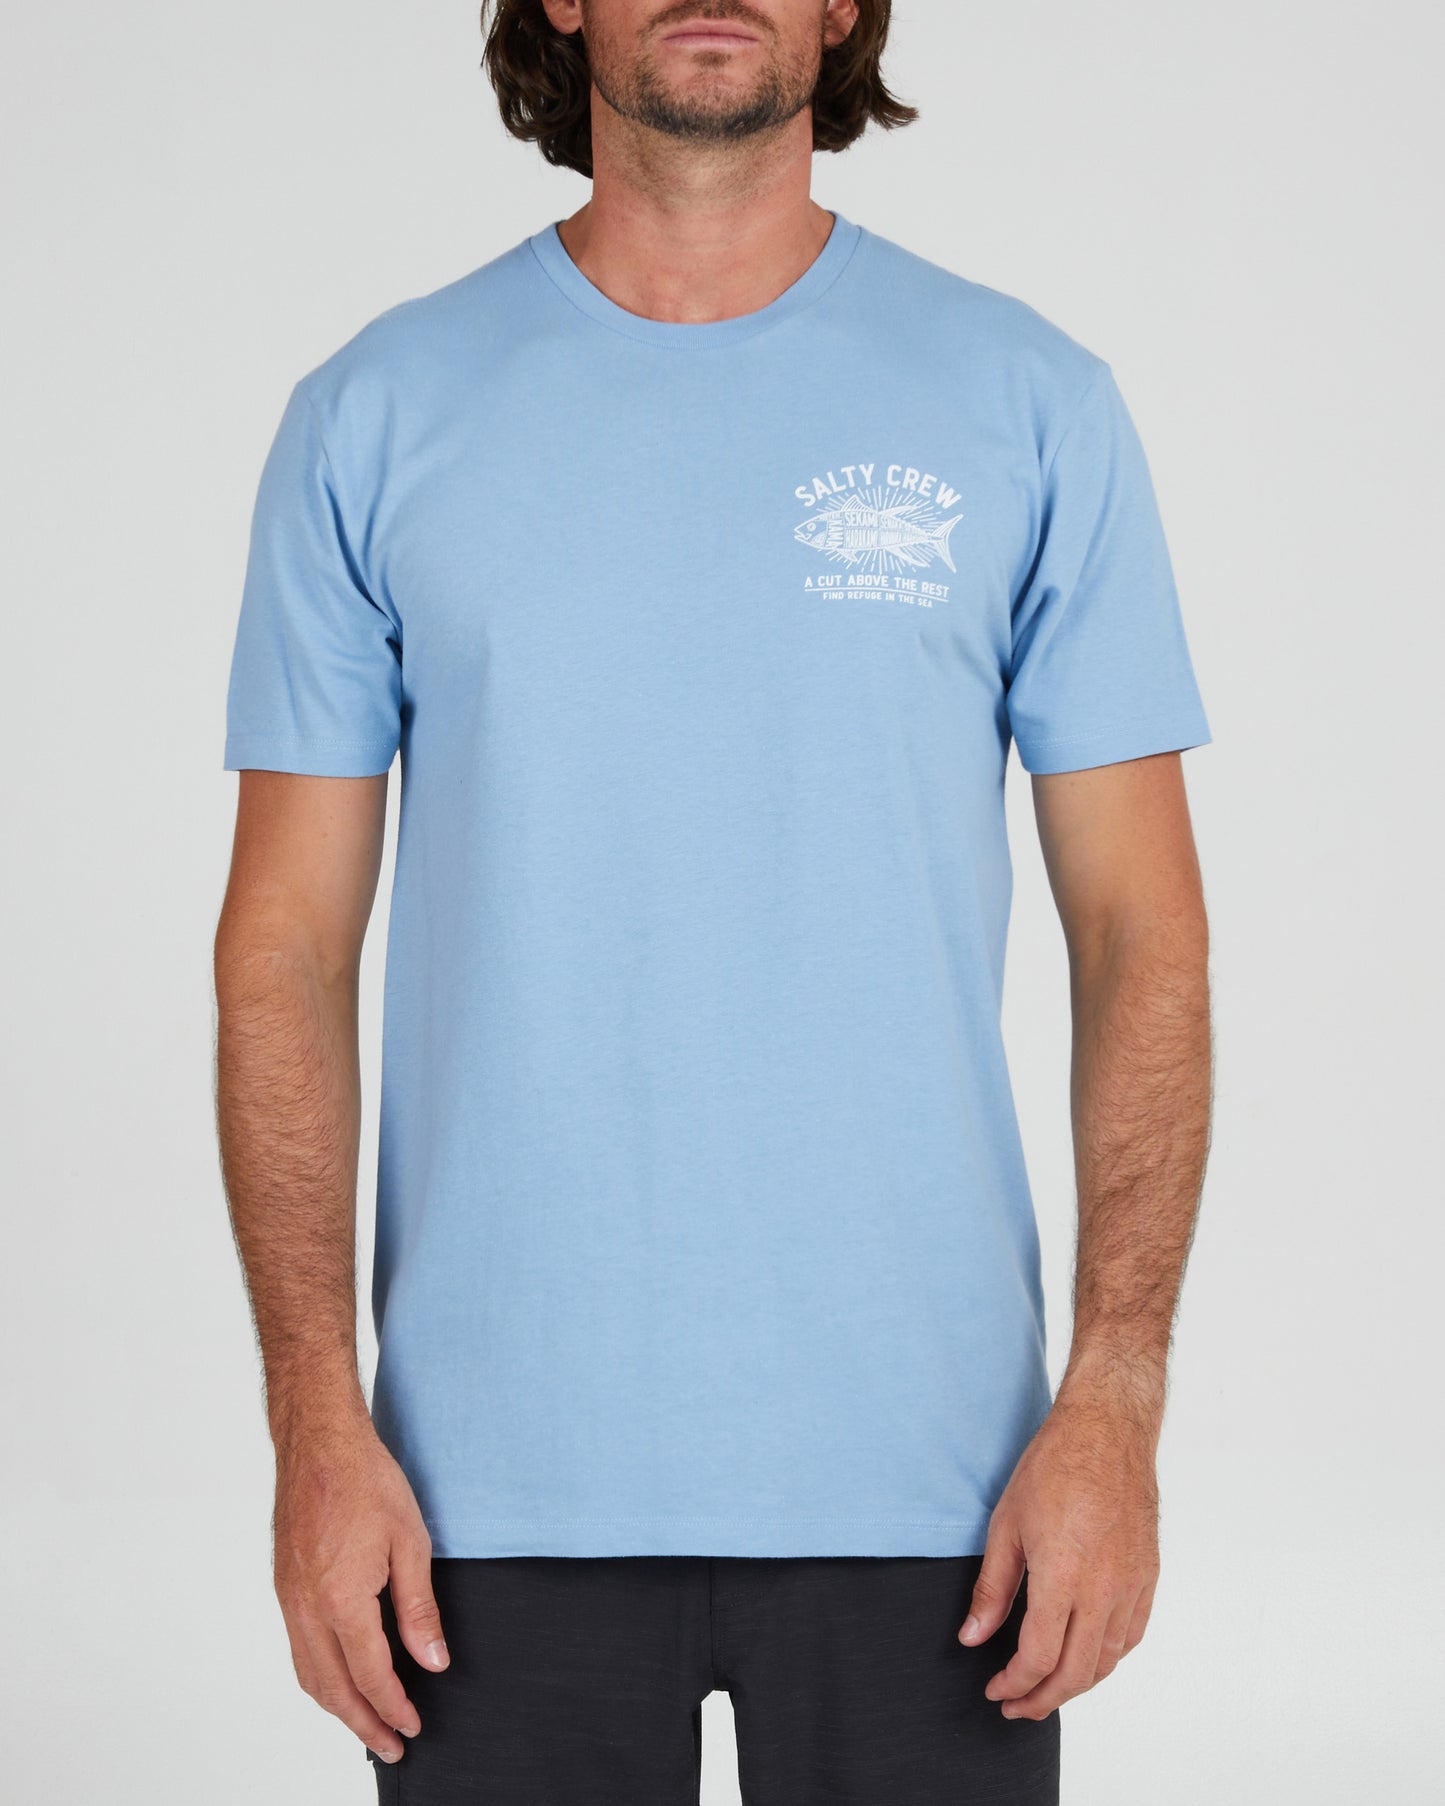 On body front of the Cut Above Marine Blue S/S Premium Tee